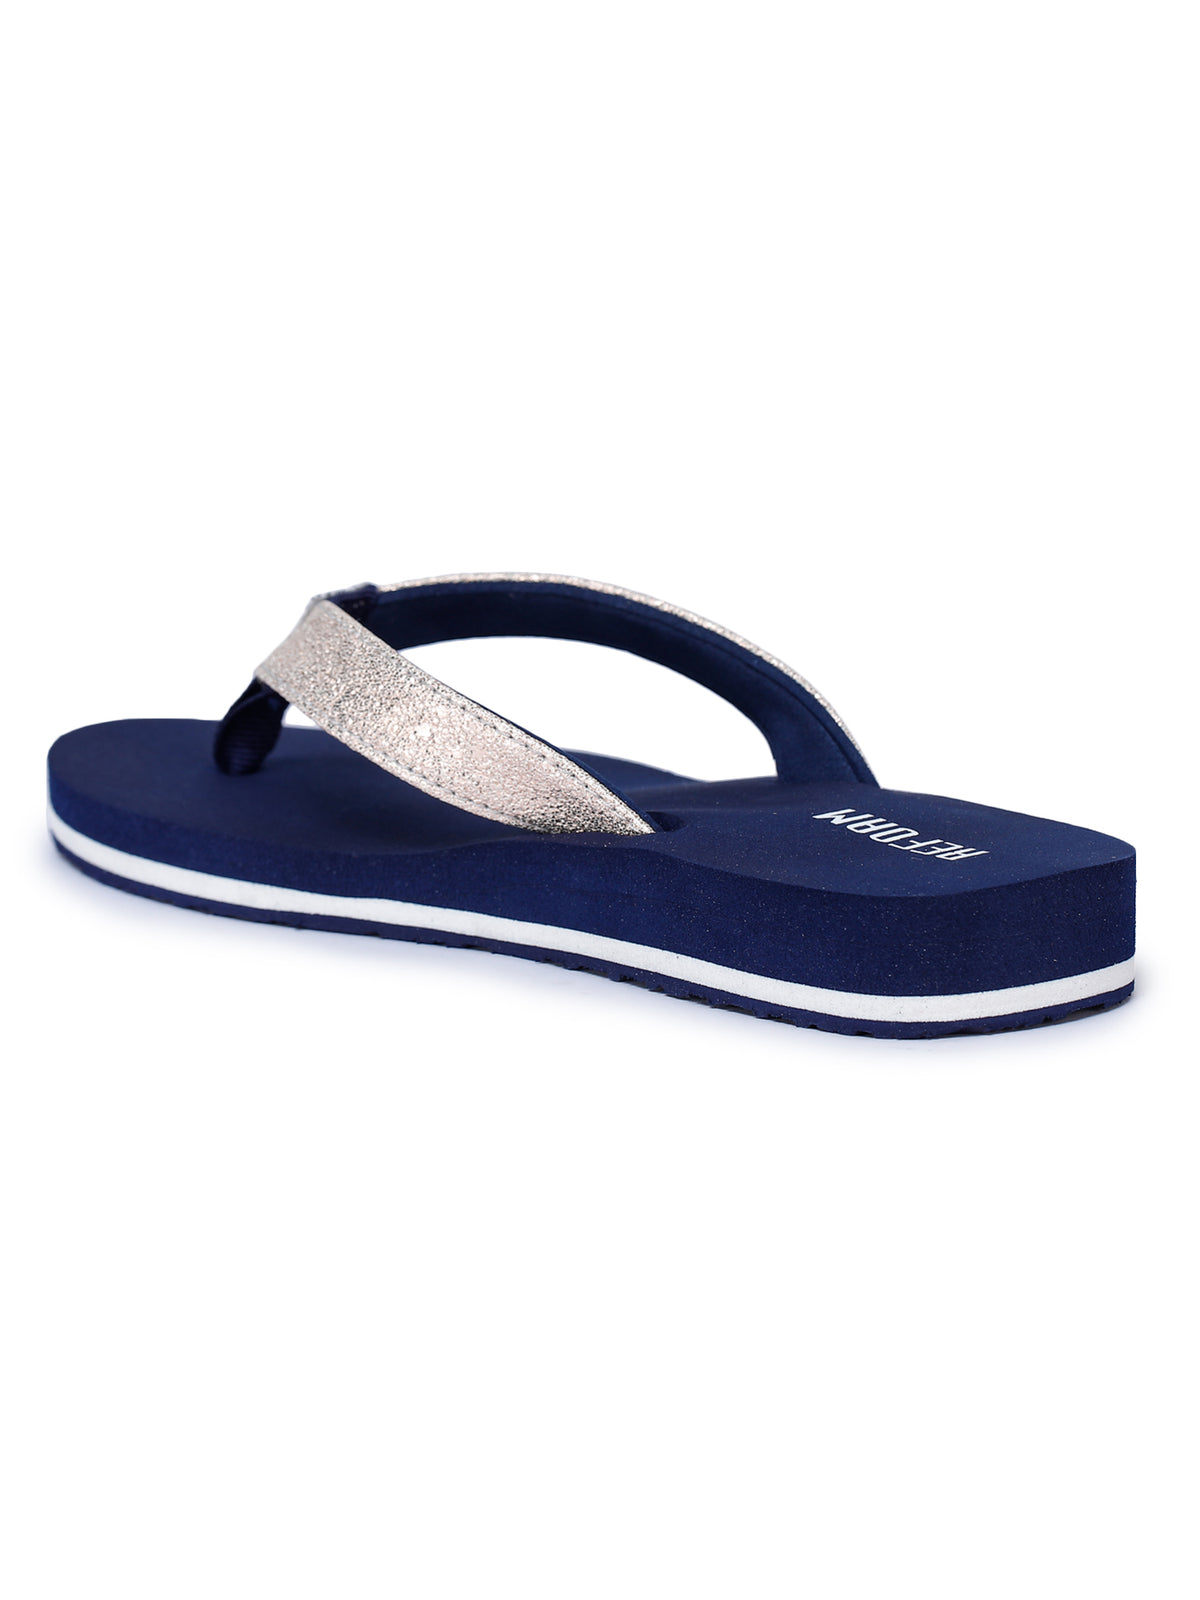 Navy Blue Solid Mesh Slip On Casual Slippers For Women